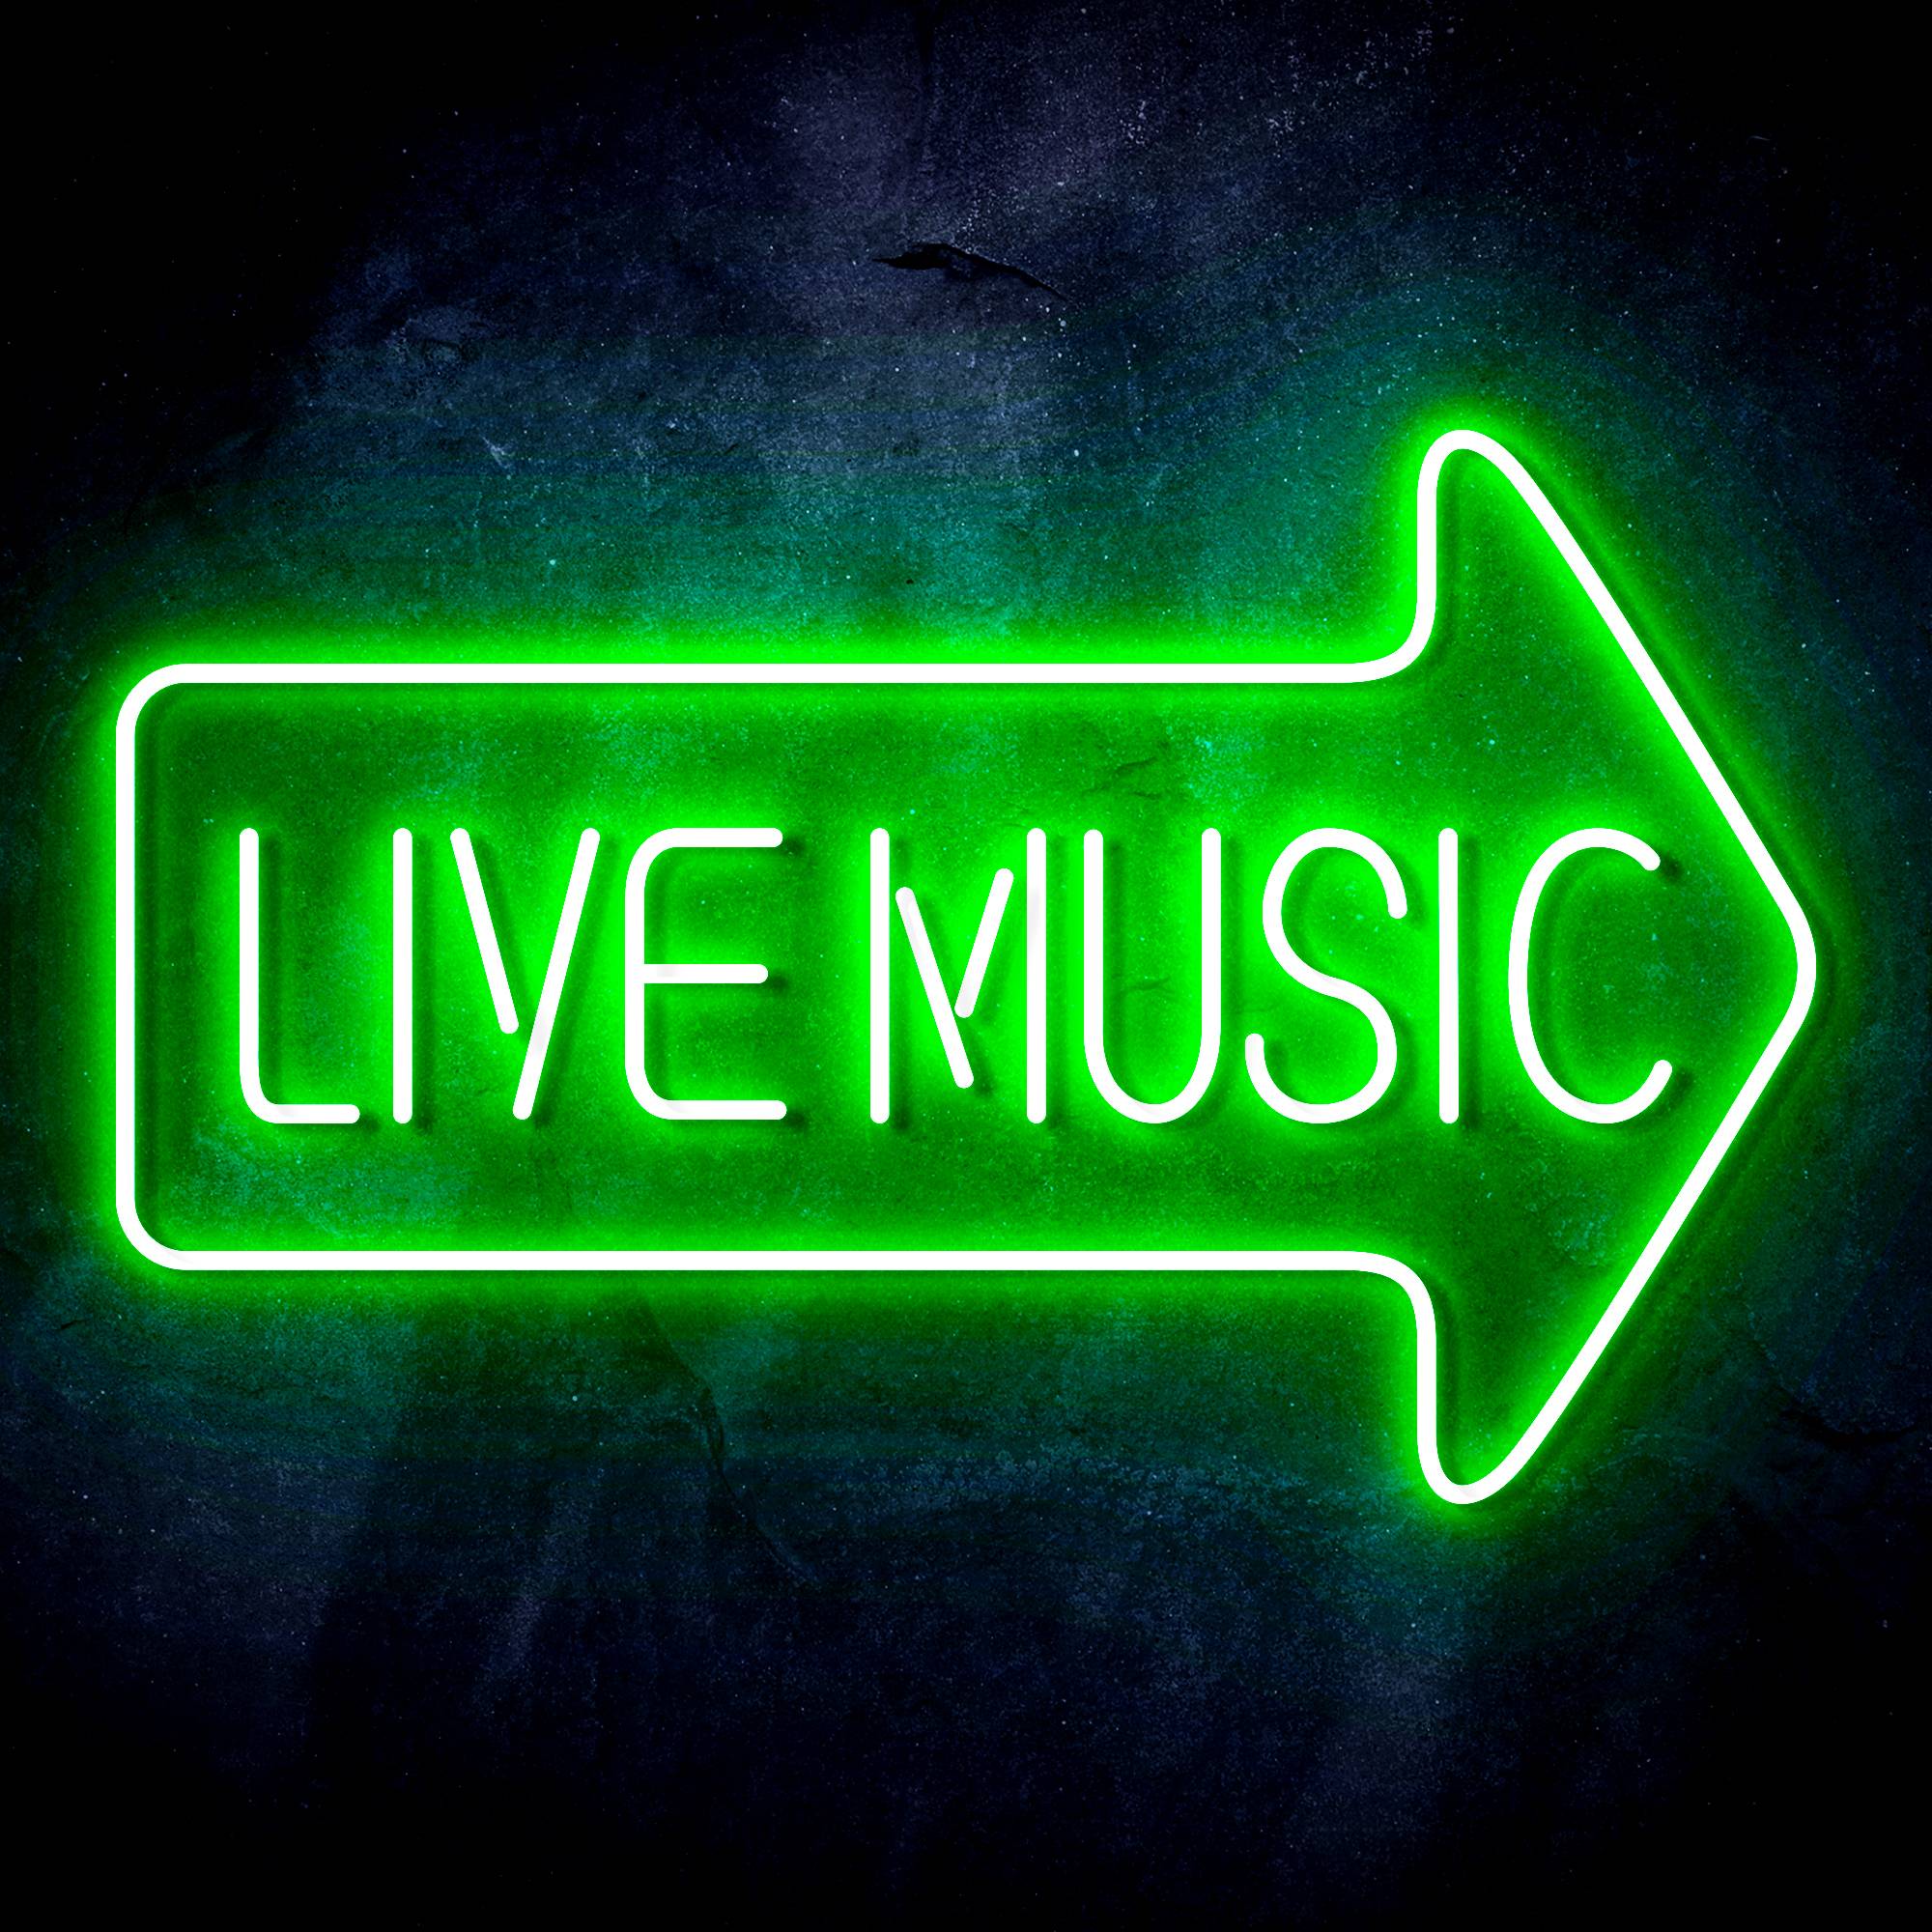 Live music with arrow LED Neon Sign